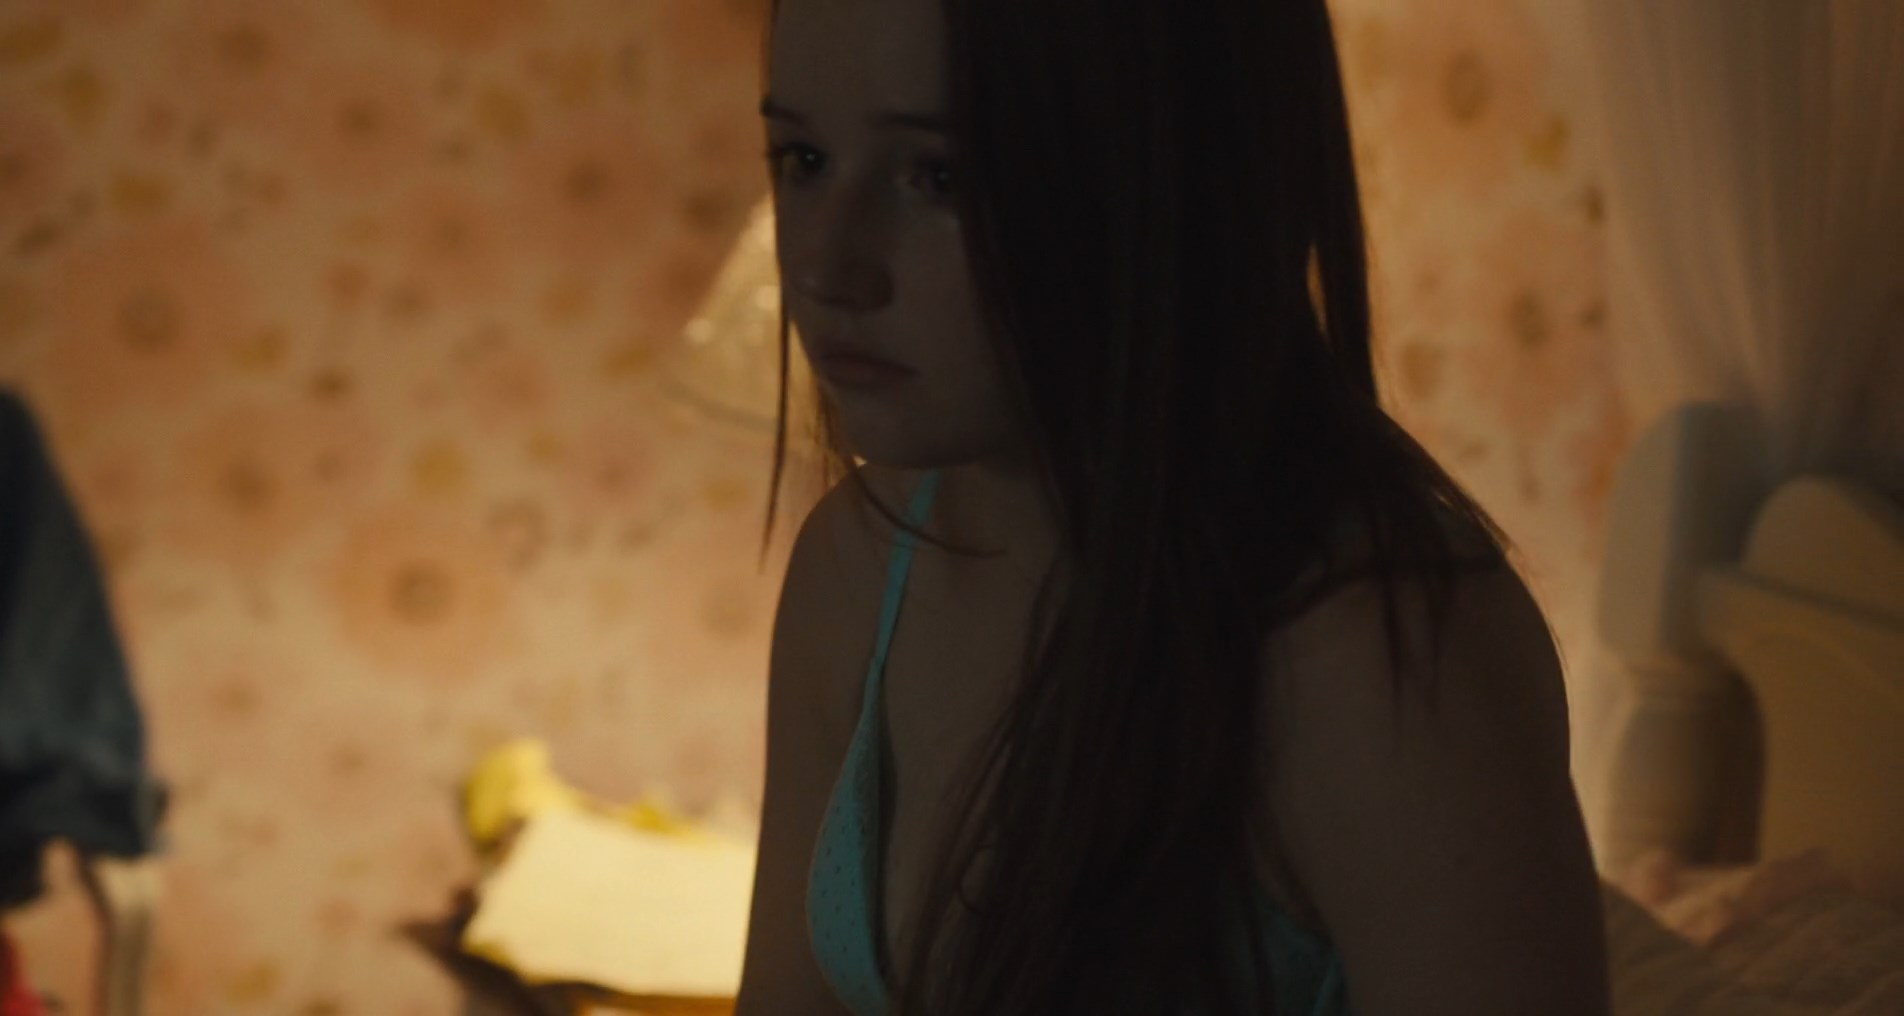 Stunning Kaitlyn Dever Shows Her Sexy Back and a Hint of Cleavage As Well